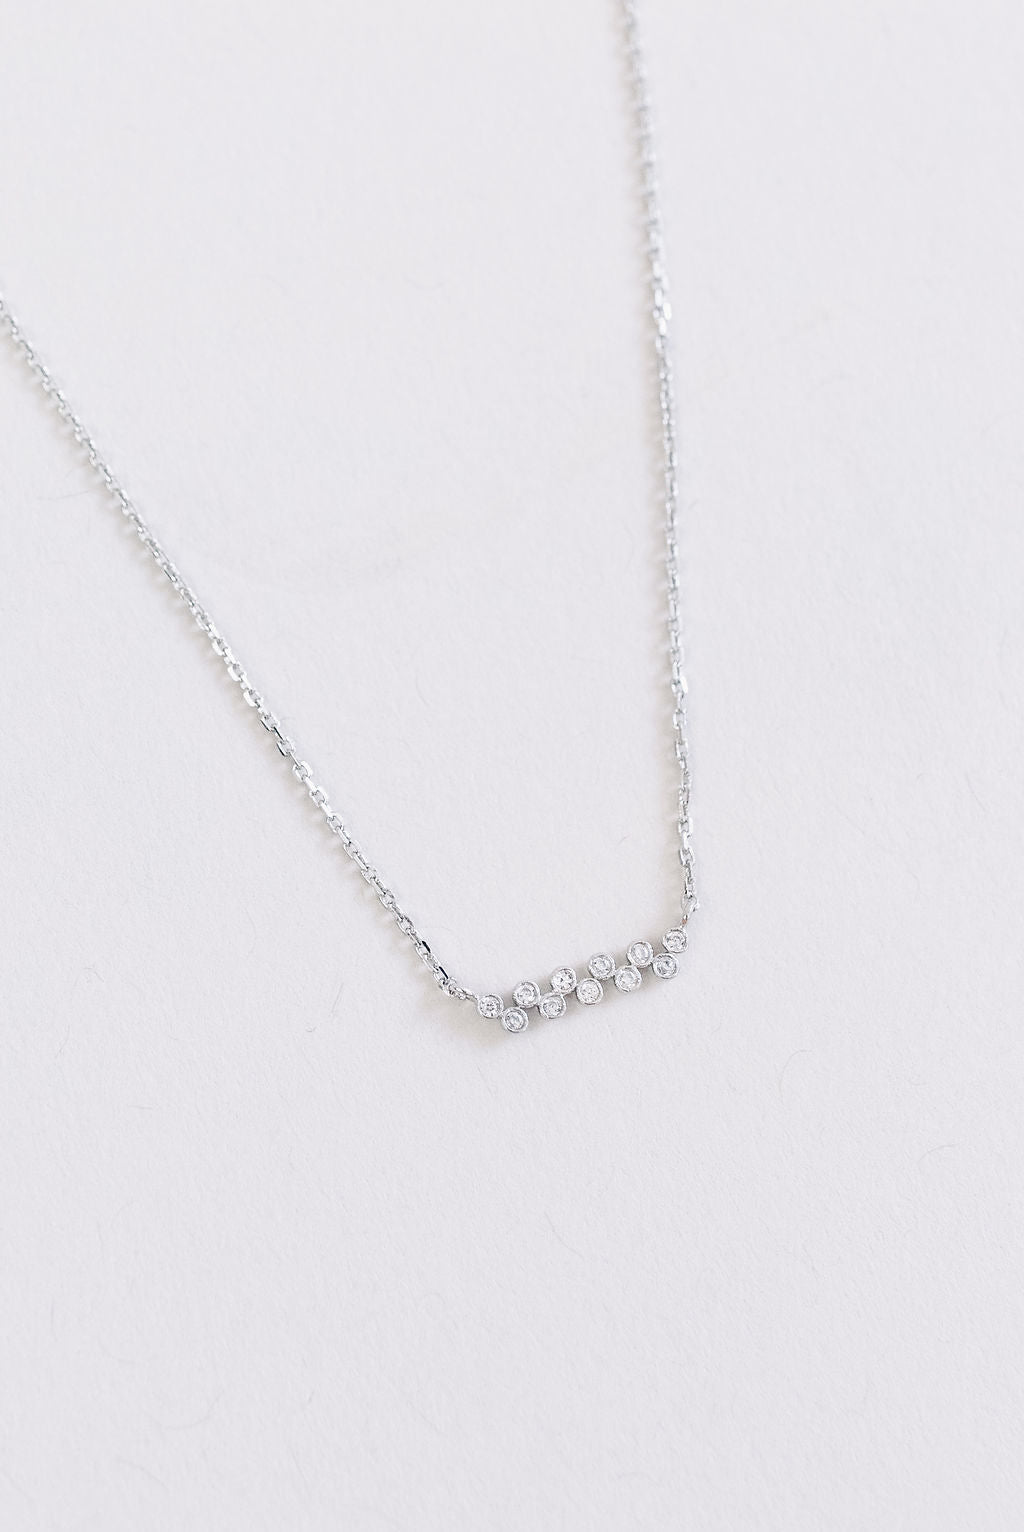 Stacked Dainty Gemstone Necklace | Assorted - Poppy and Stella